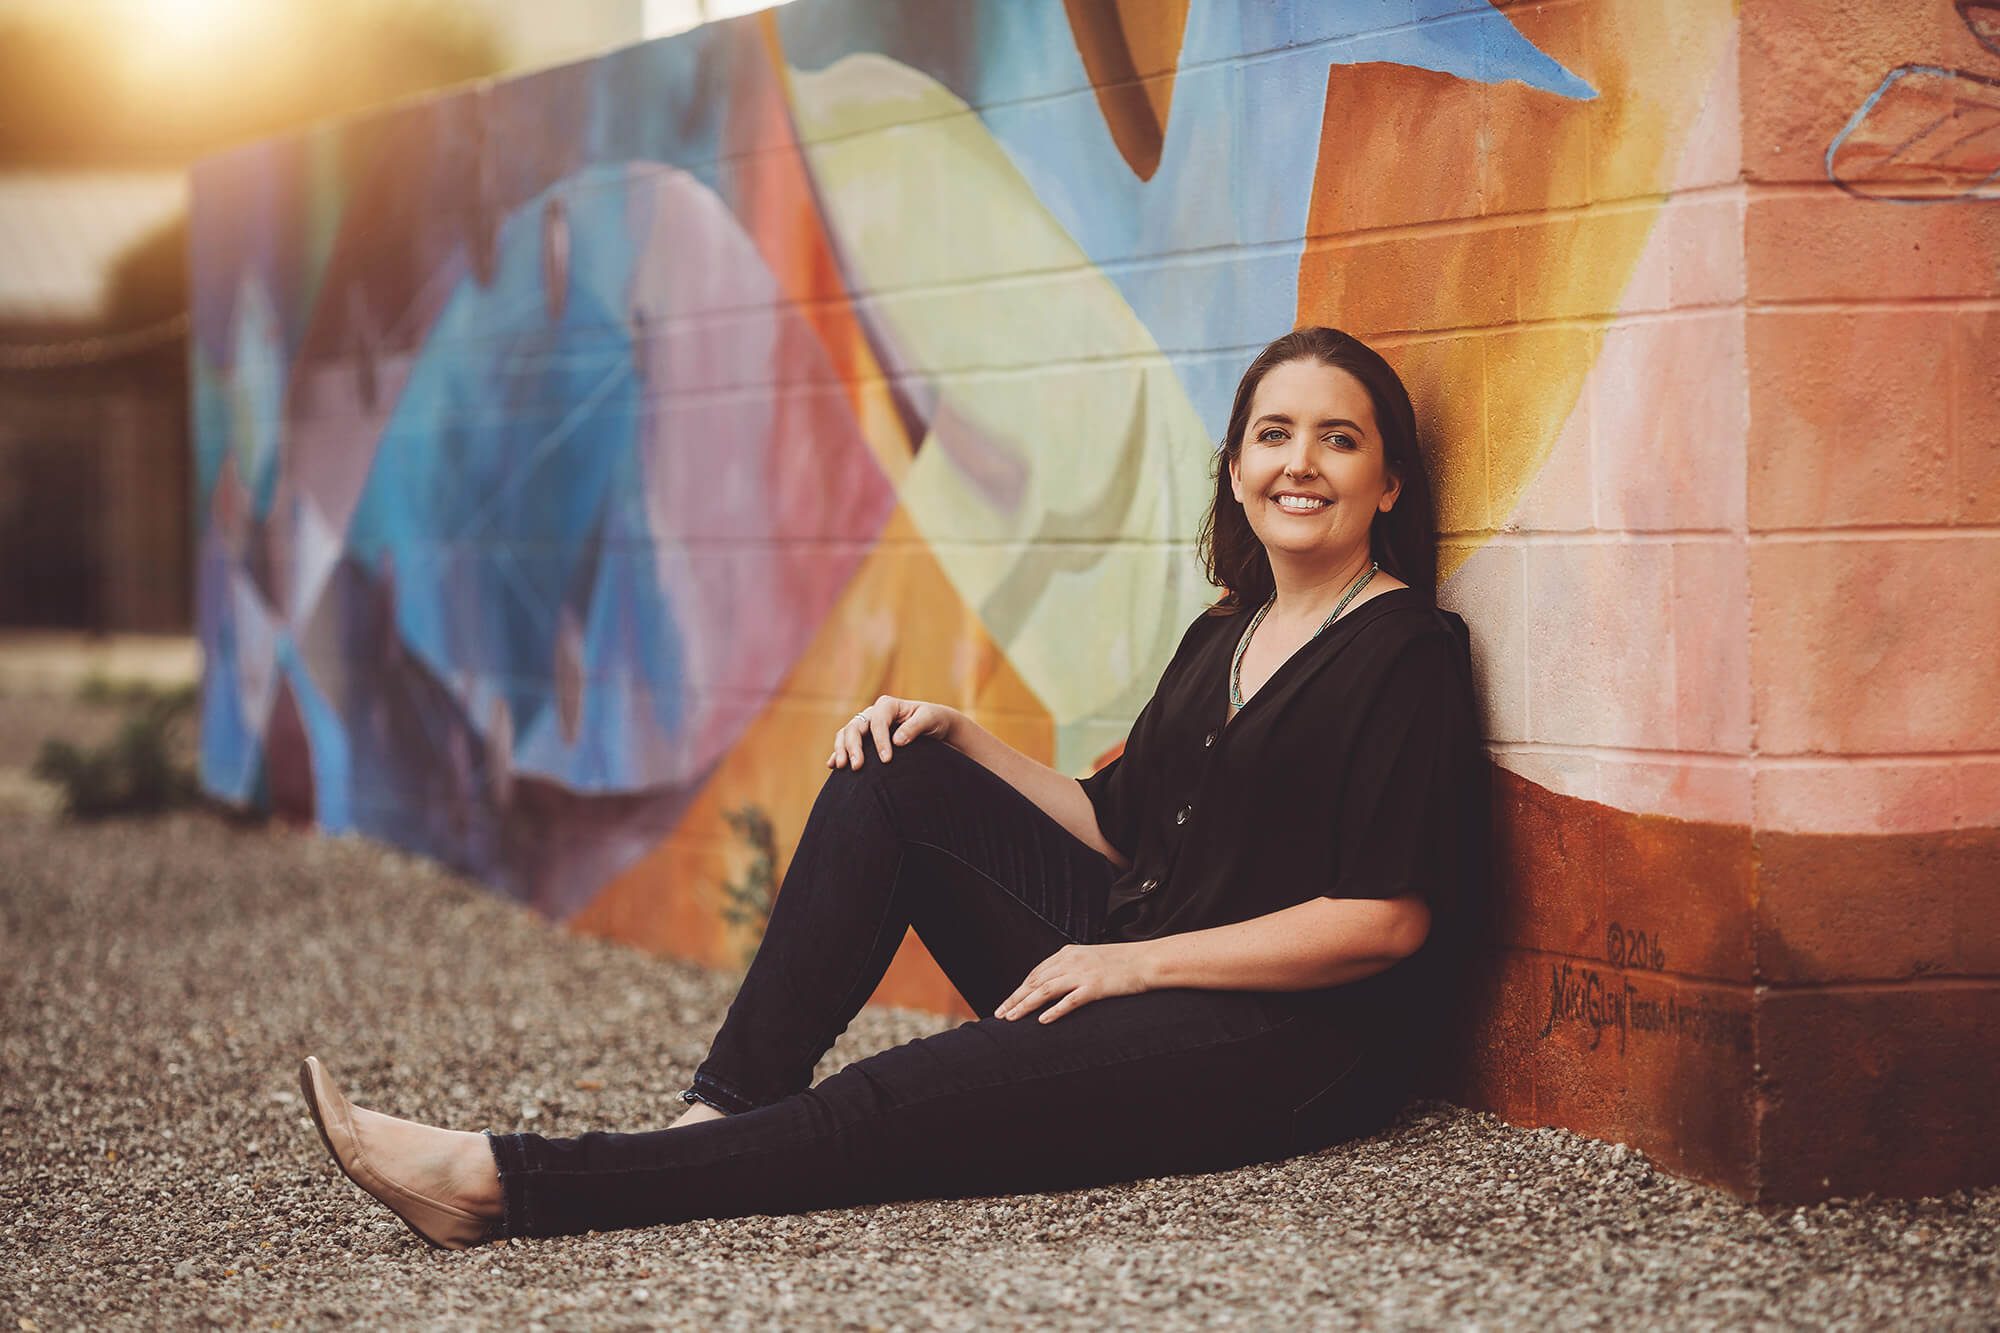 Megan during her headshot session at one of Tucson's beautiful mural walls